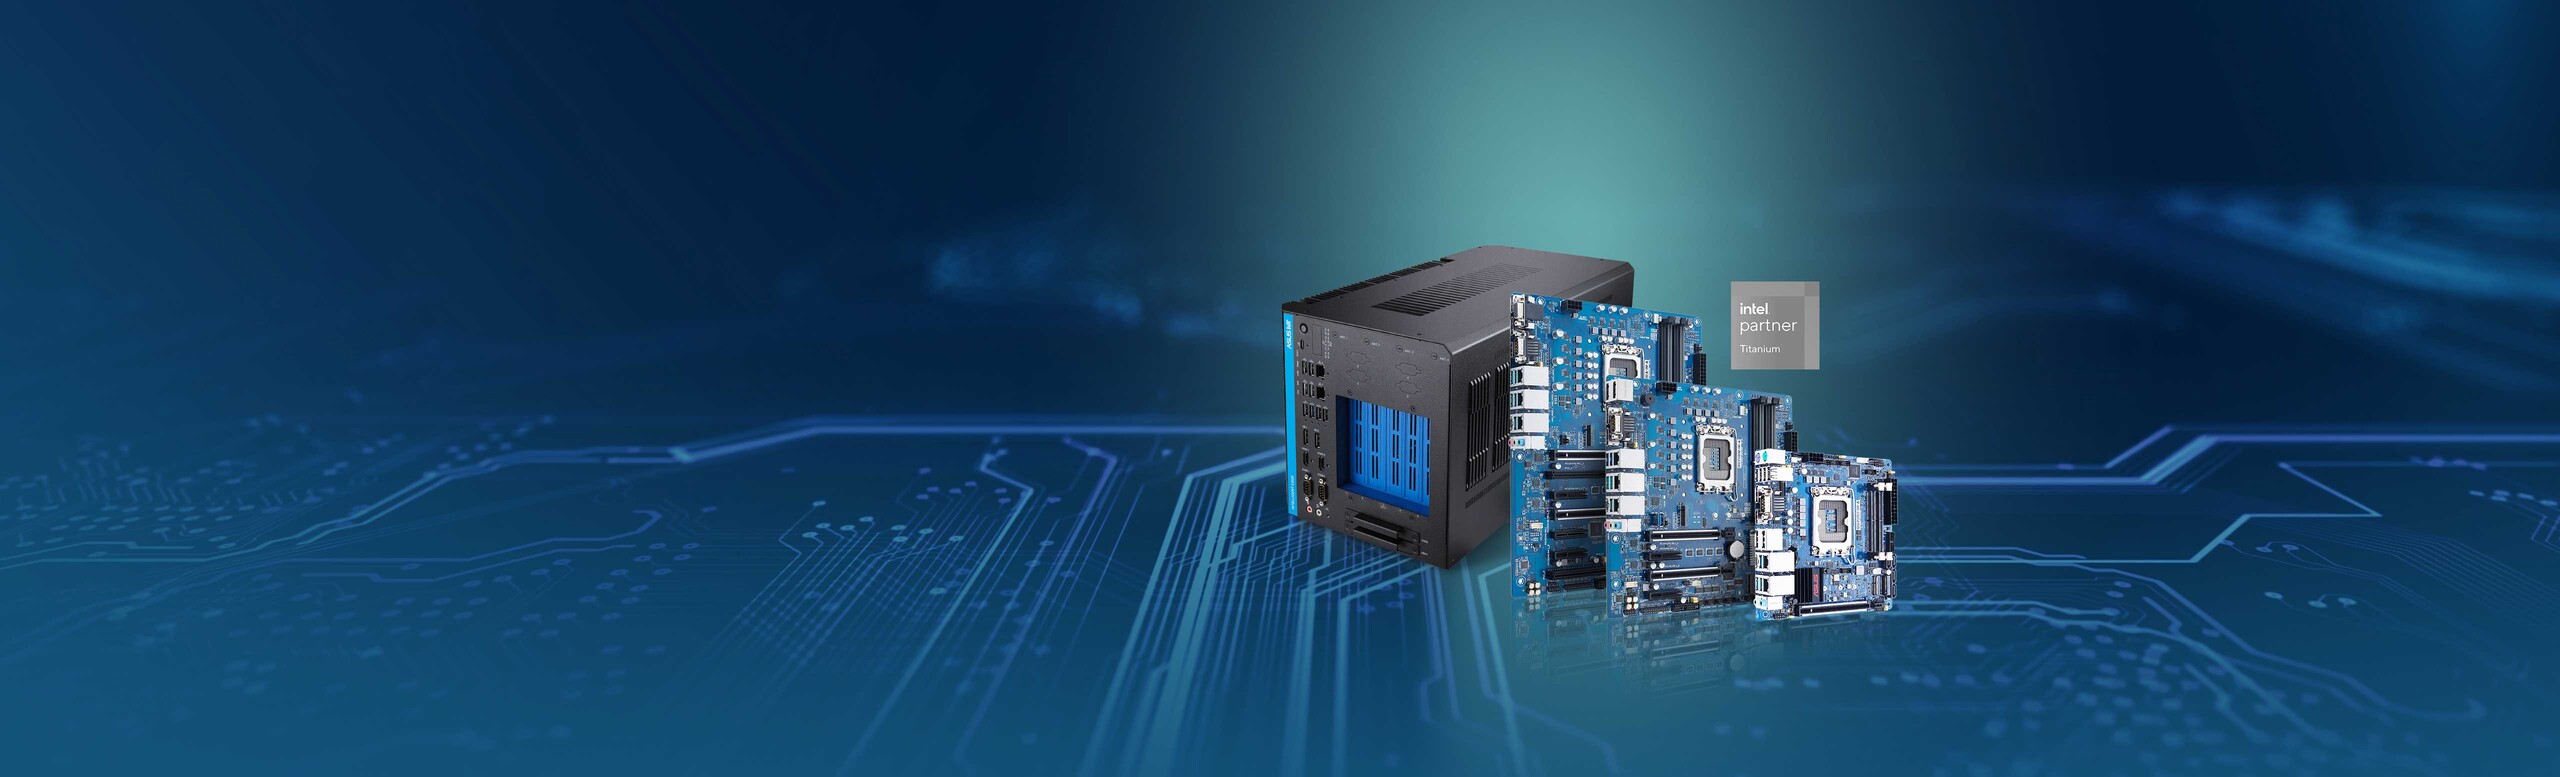 ASUS IoT showcases cutting-edge industrial motherboards and edge AI systems designed for Intel® Core™ processors (14th gen). The image features the ASUS edge computer, industrial motherboards, and the Intel partner logo against a blue background